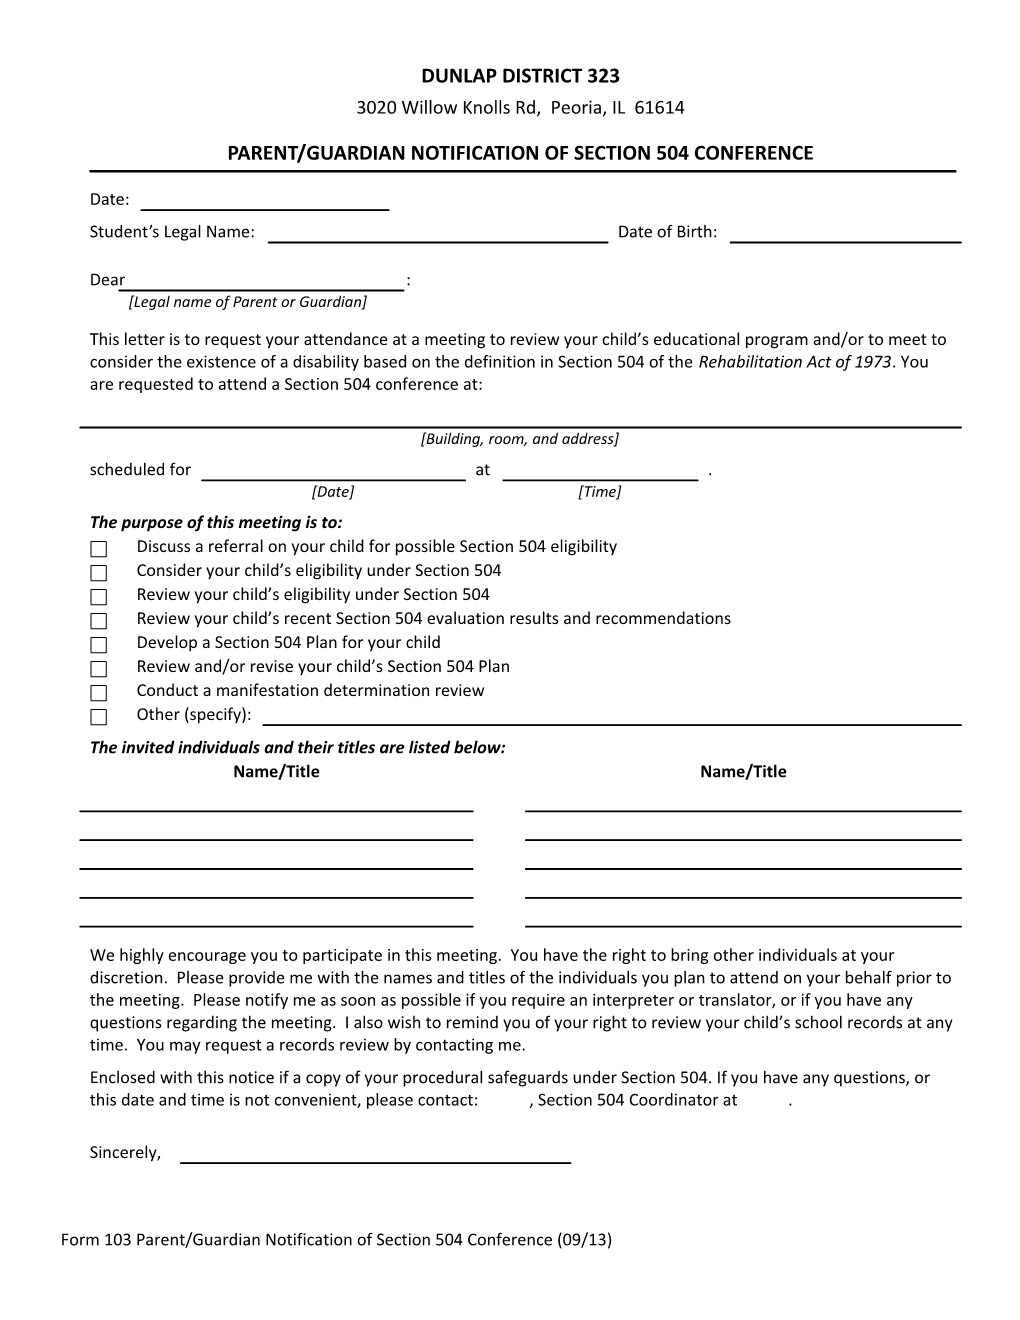 Form 103 Parent/Guardian Notification of Section 504 Conference (09/13)